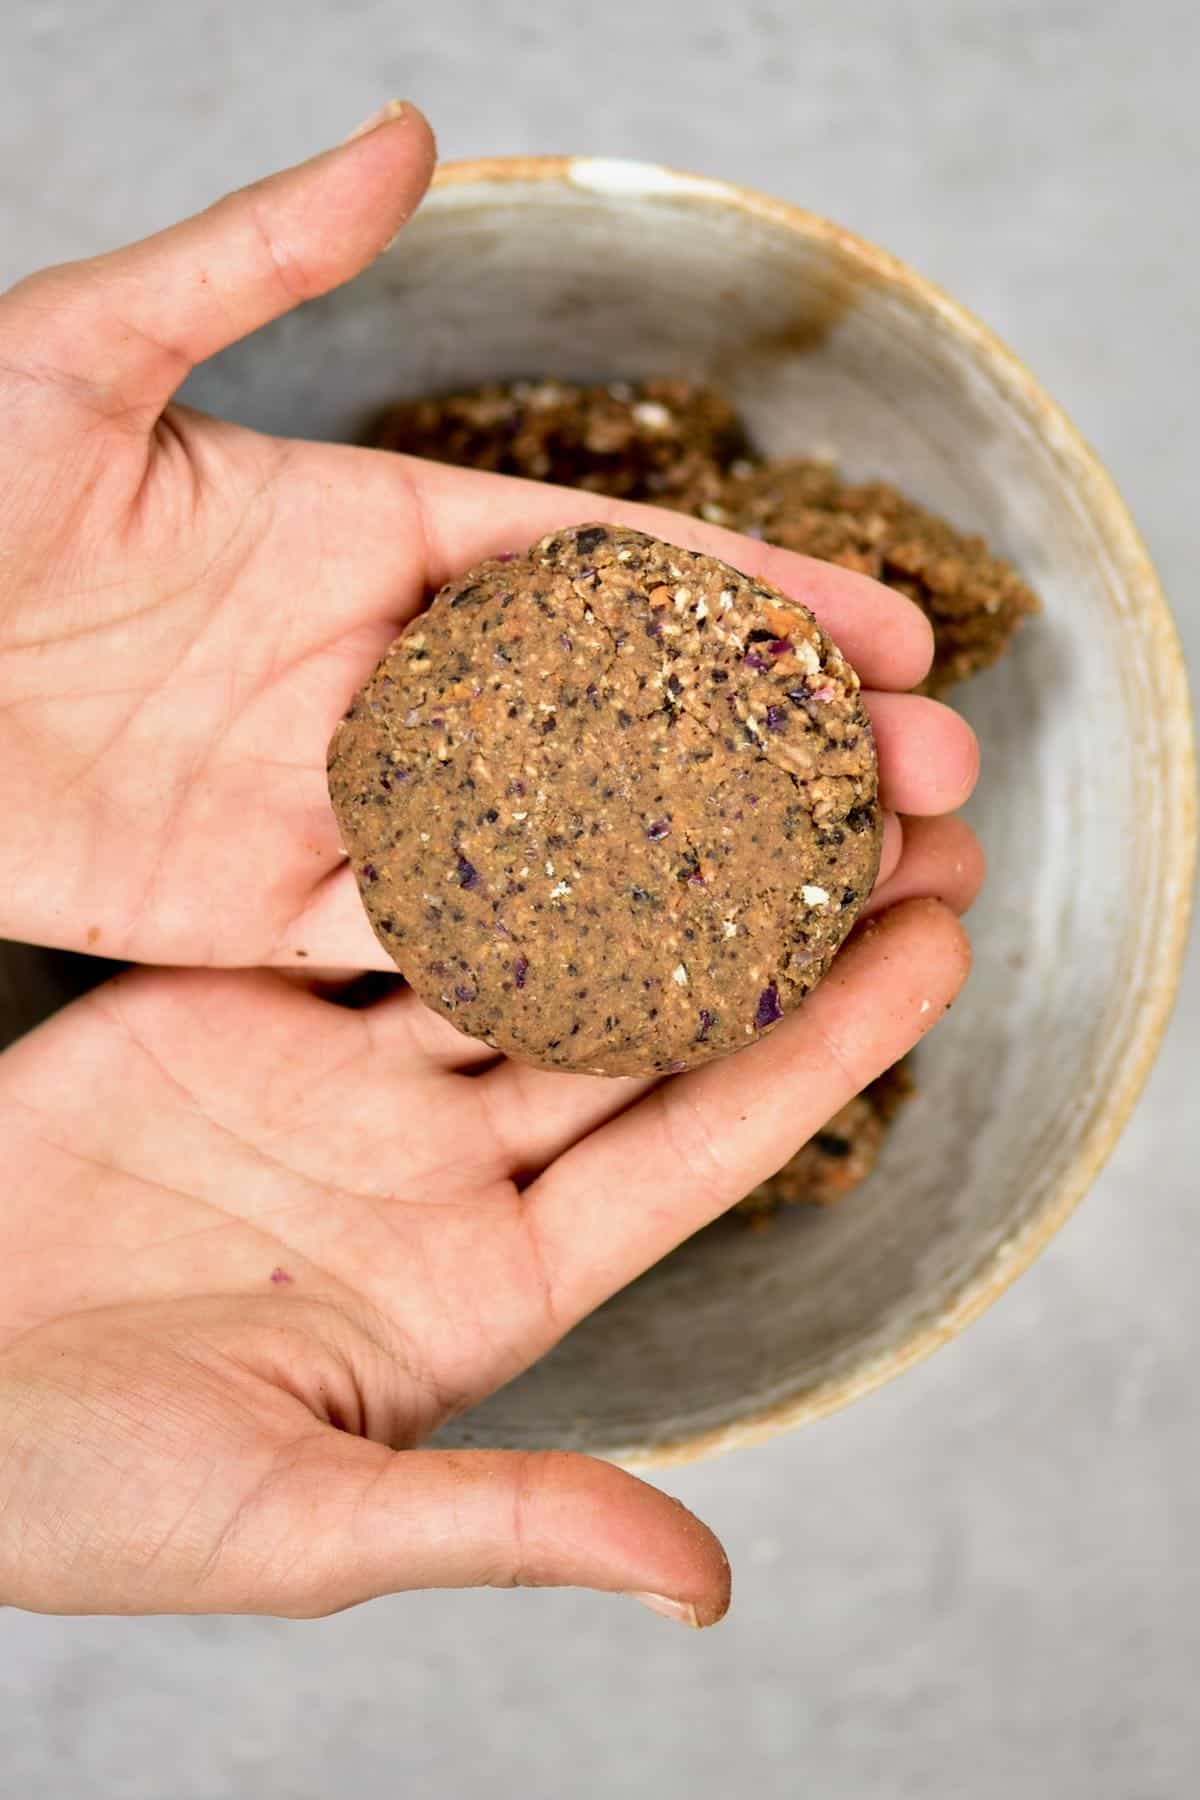 Two hands holding an uncooked black bean burger patty